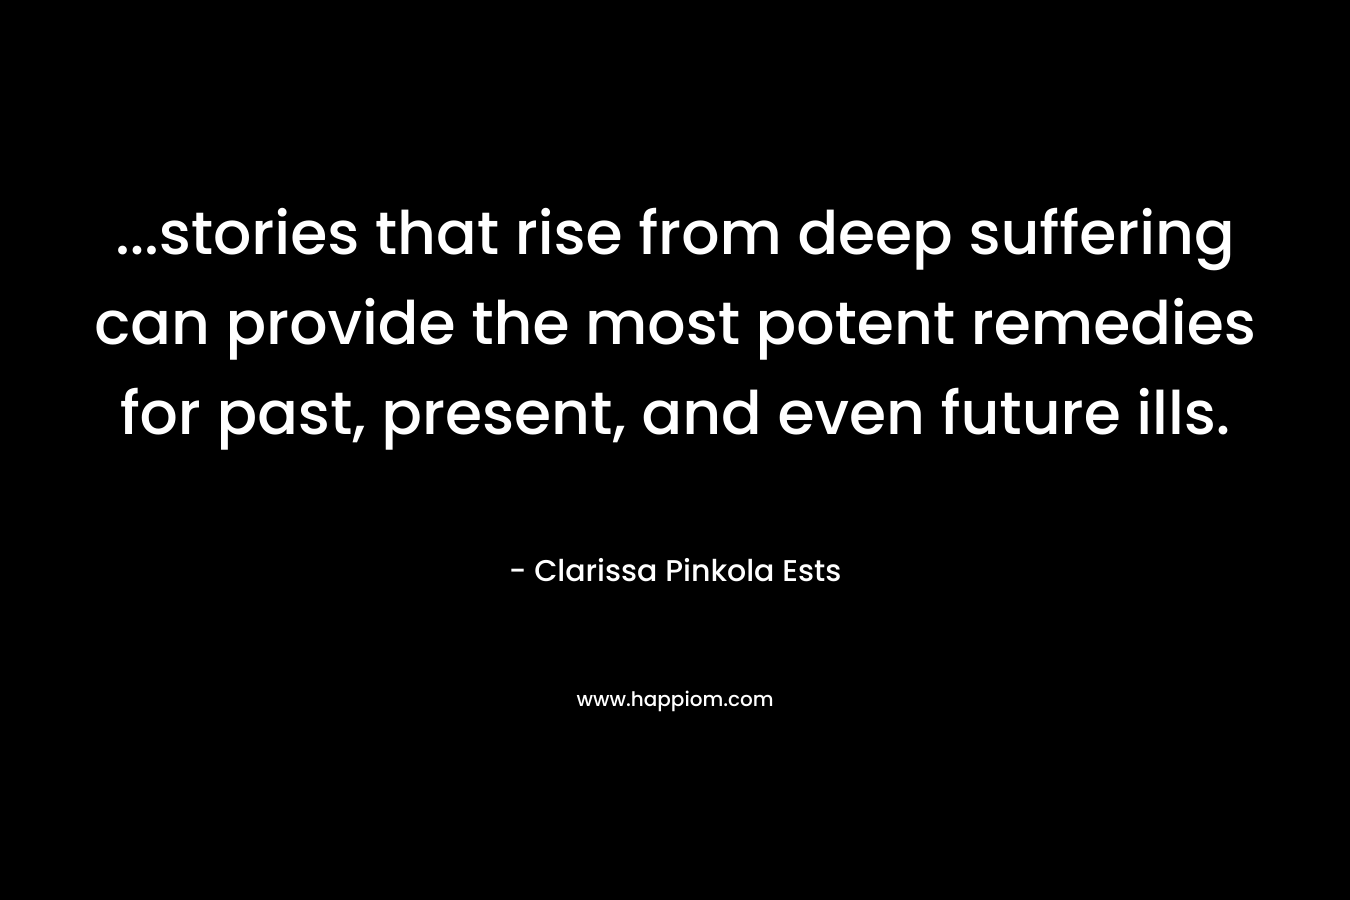 …stories that rise from deep suffering can provide the most potent remedies for past, present, and even future ills. – Clarissa Pinkola Ests